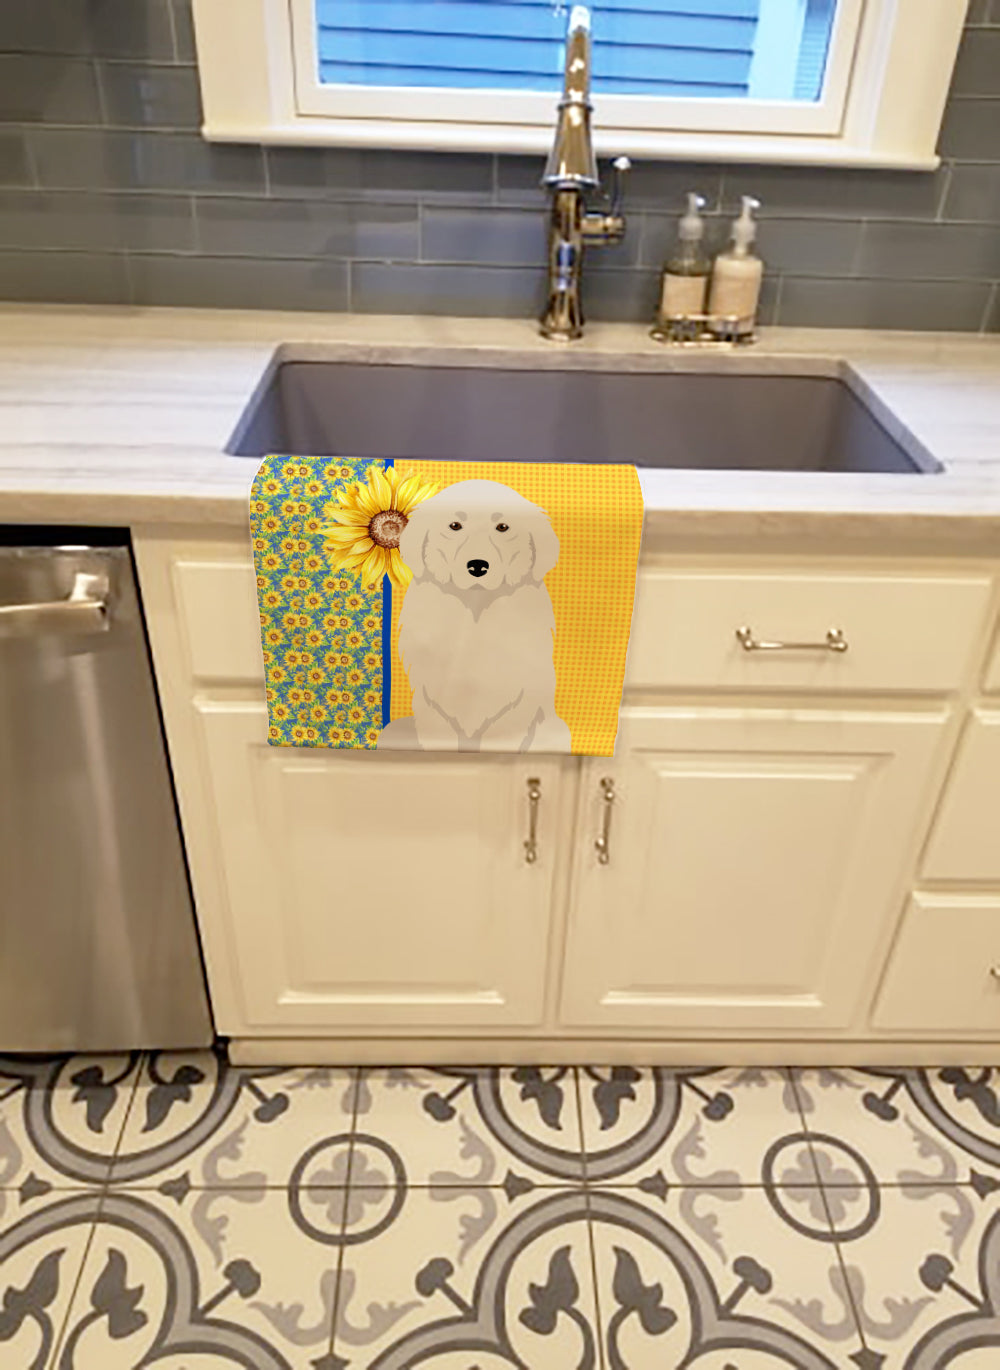 Buy this Summer Sunflowers Great Pyrenees Kitchen Towel